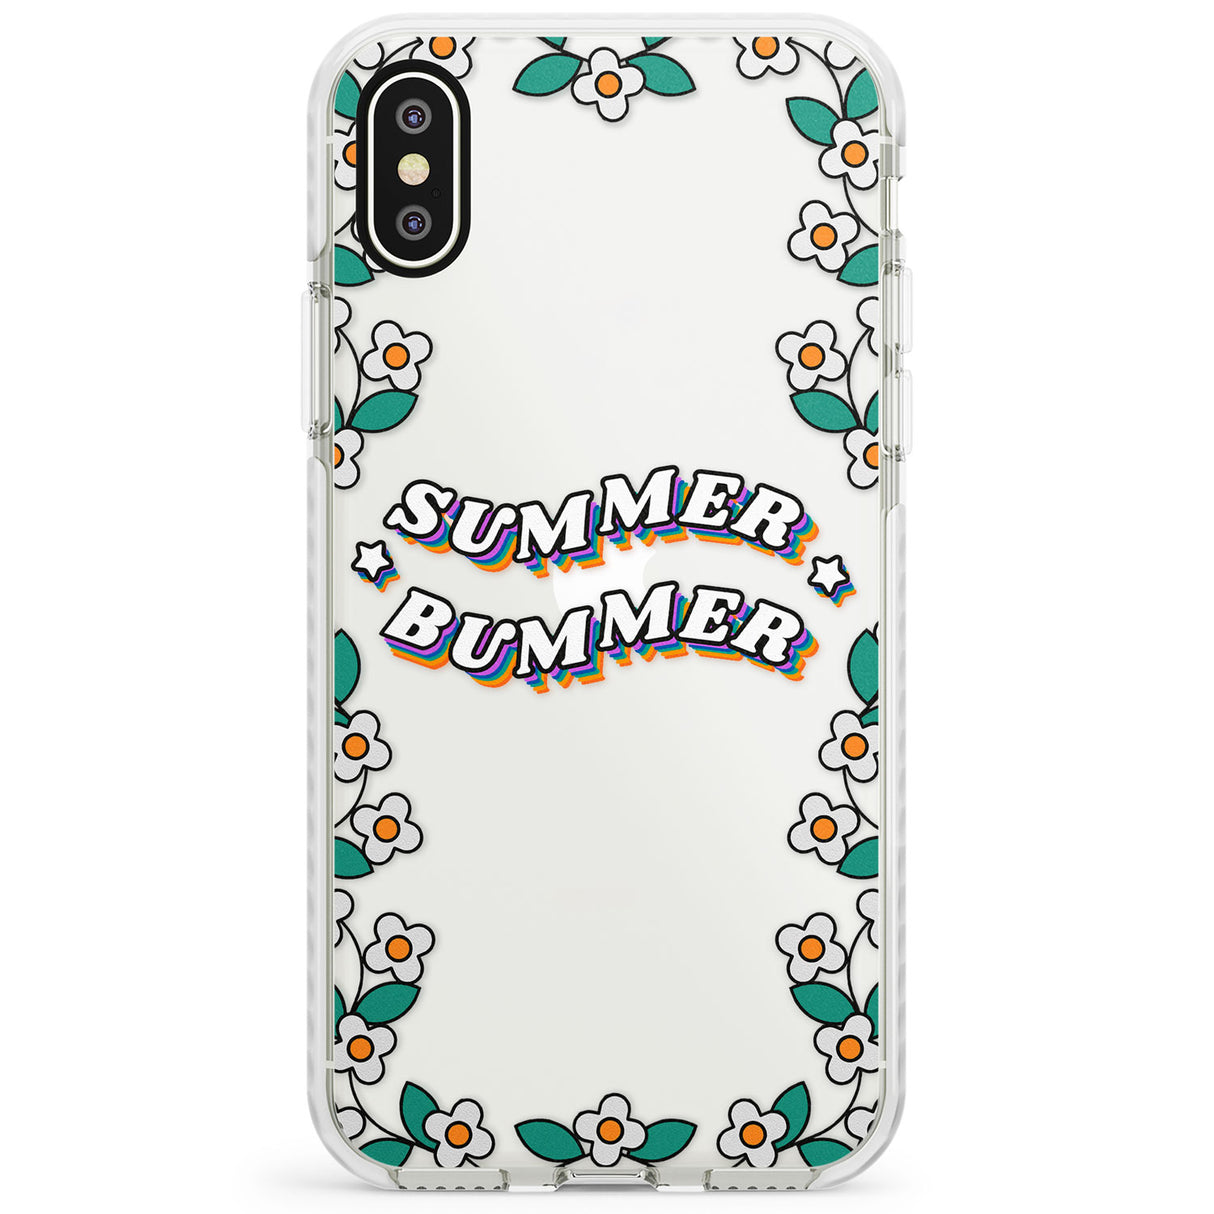 Summer Bummer Impact Phone Case for iPhone X XS Max XR